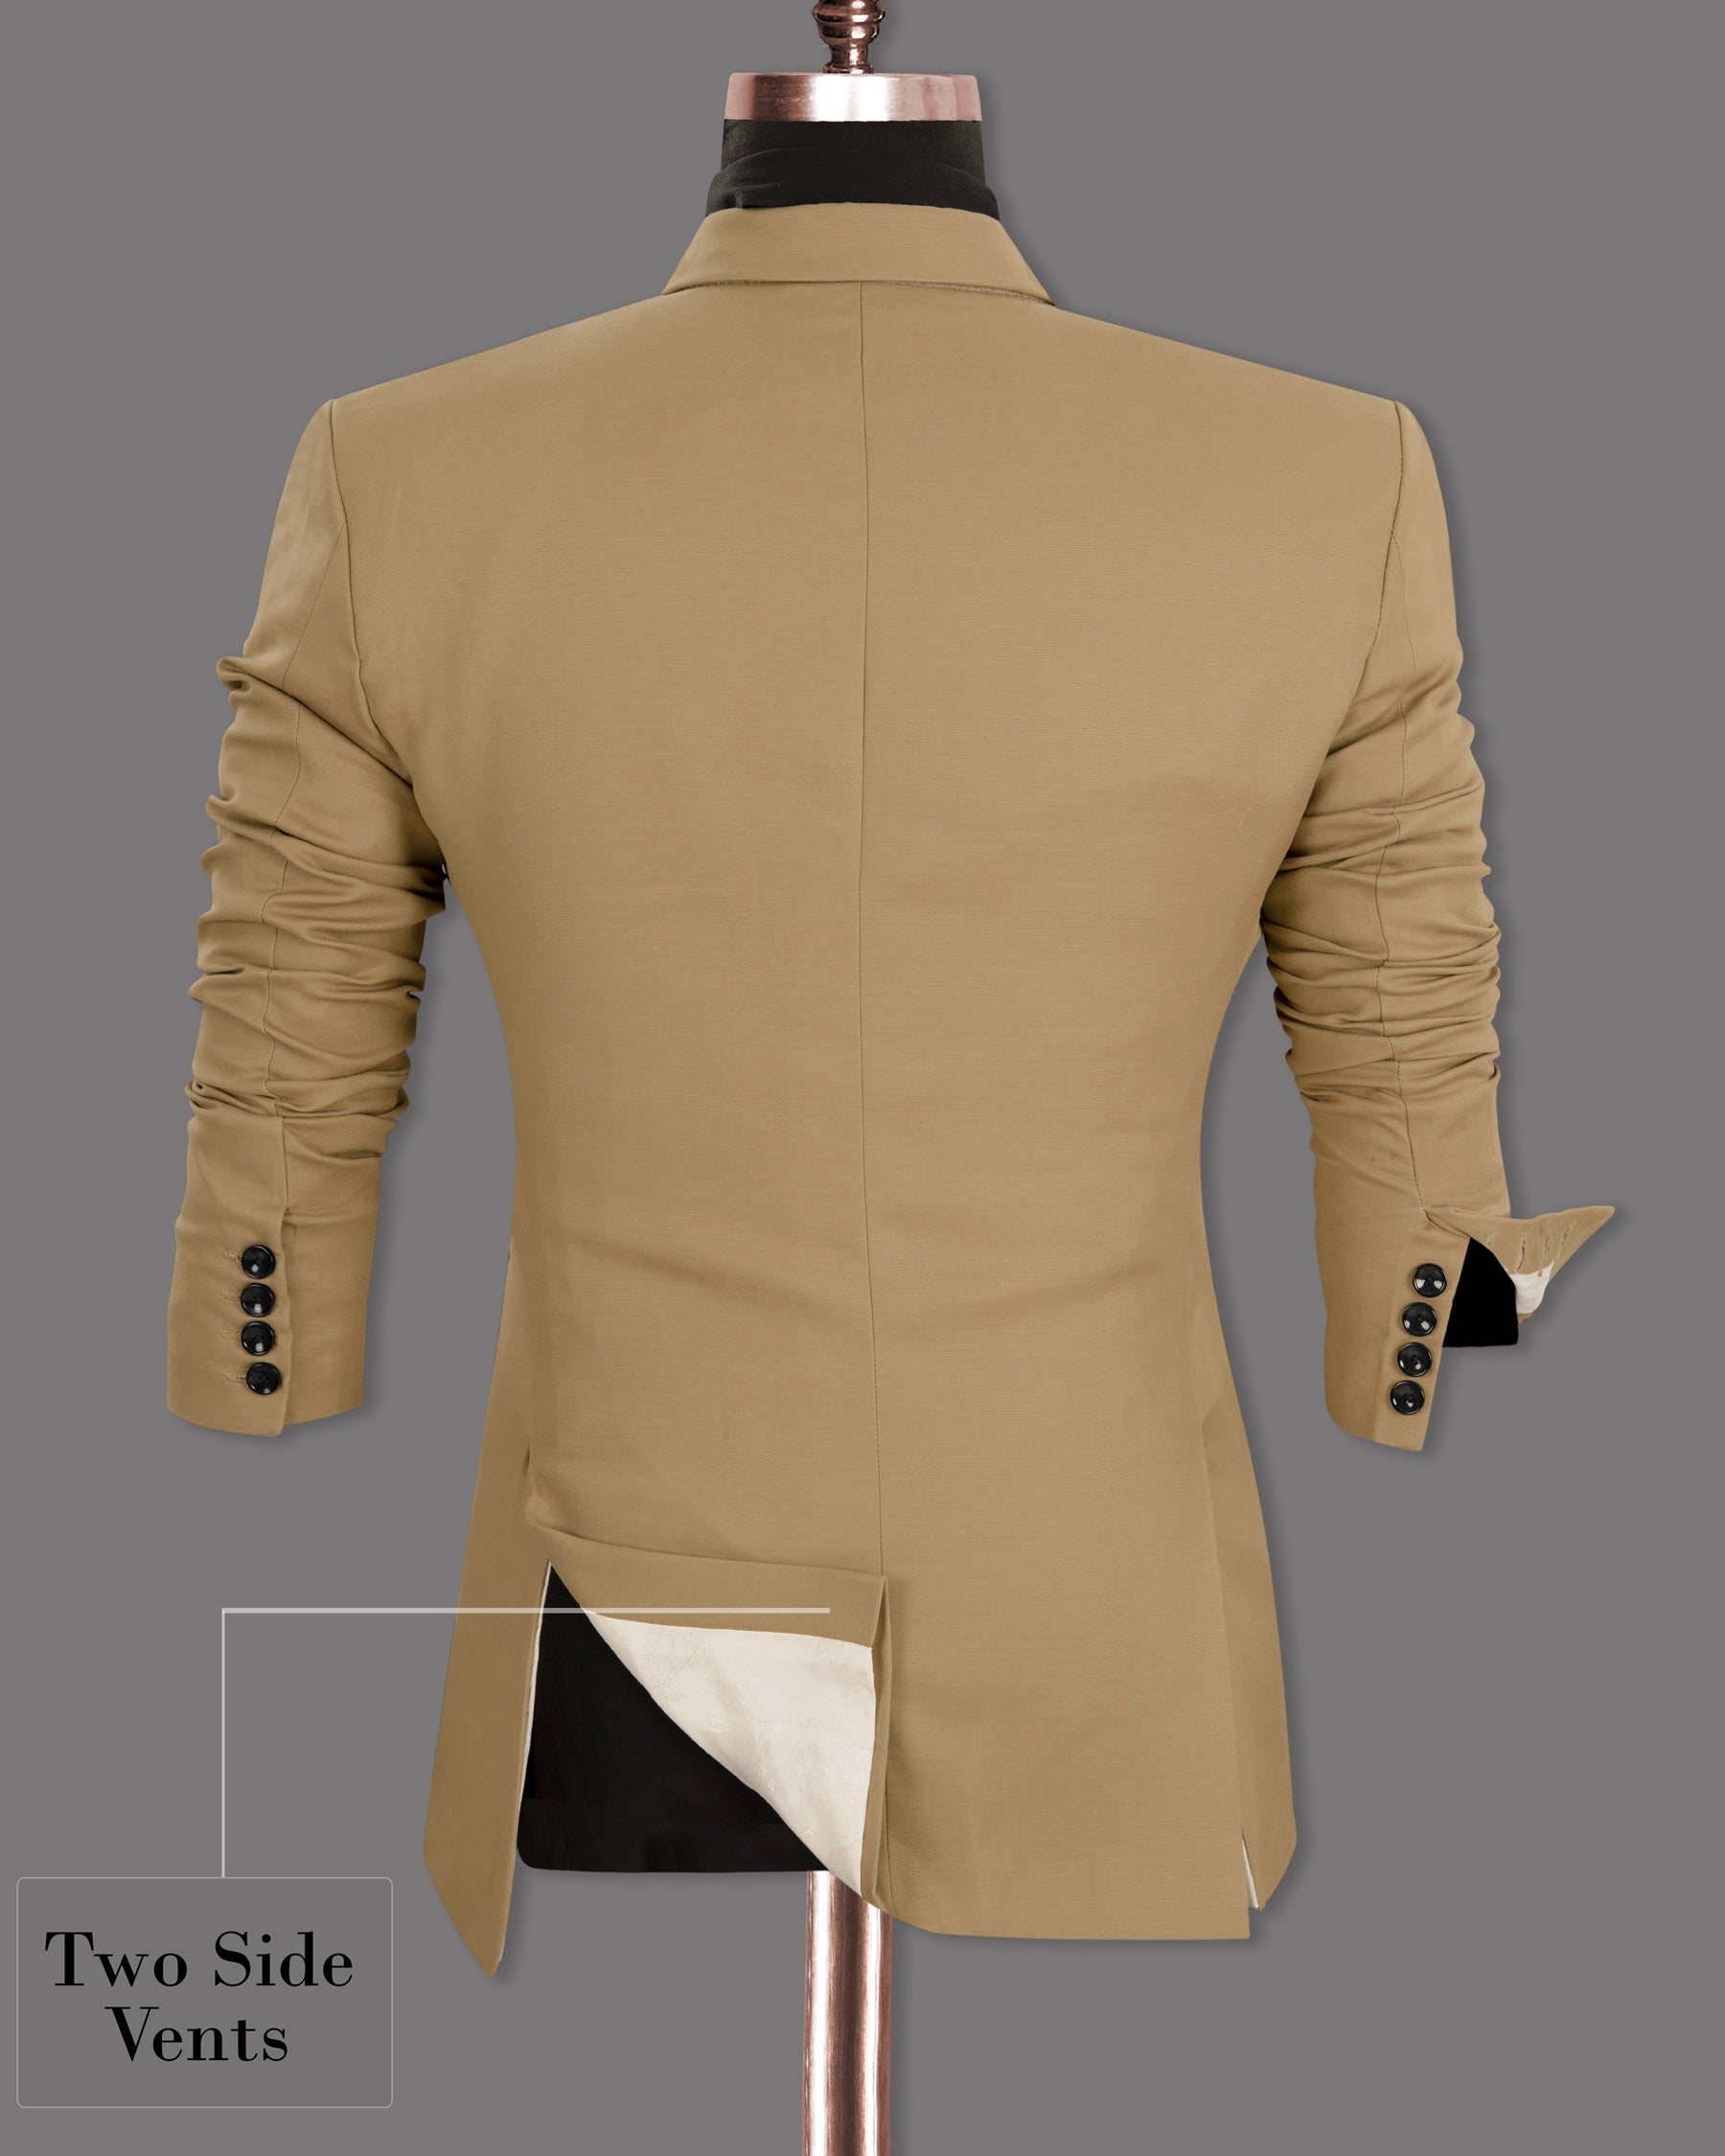 Mongoose Cream Stretchable Double Breasted Premium Cotton Blazer BL1266-DB-36, BL1266-DB-38, BL1266-DB-40, BL1266-DB-42, BL1266-DB-44, BL1266-DB-46, BL1266-DB-48, BL1266-DB-50, BL1266-DB-52, BL1266-DB-54, BL1266-DB-56, BL1266-DB-58, BL1266-DB-60